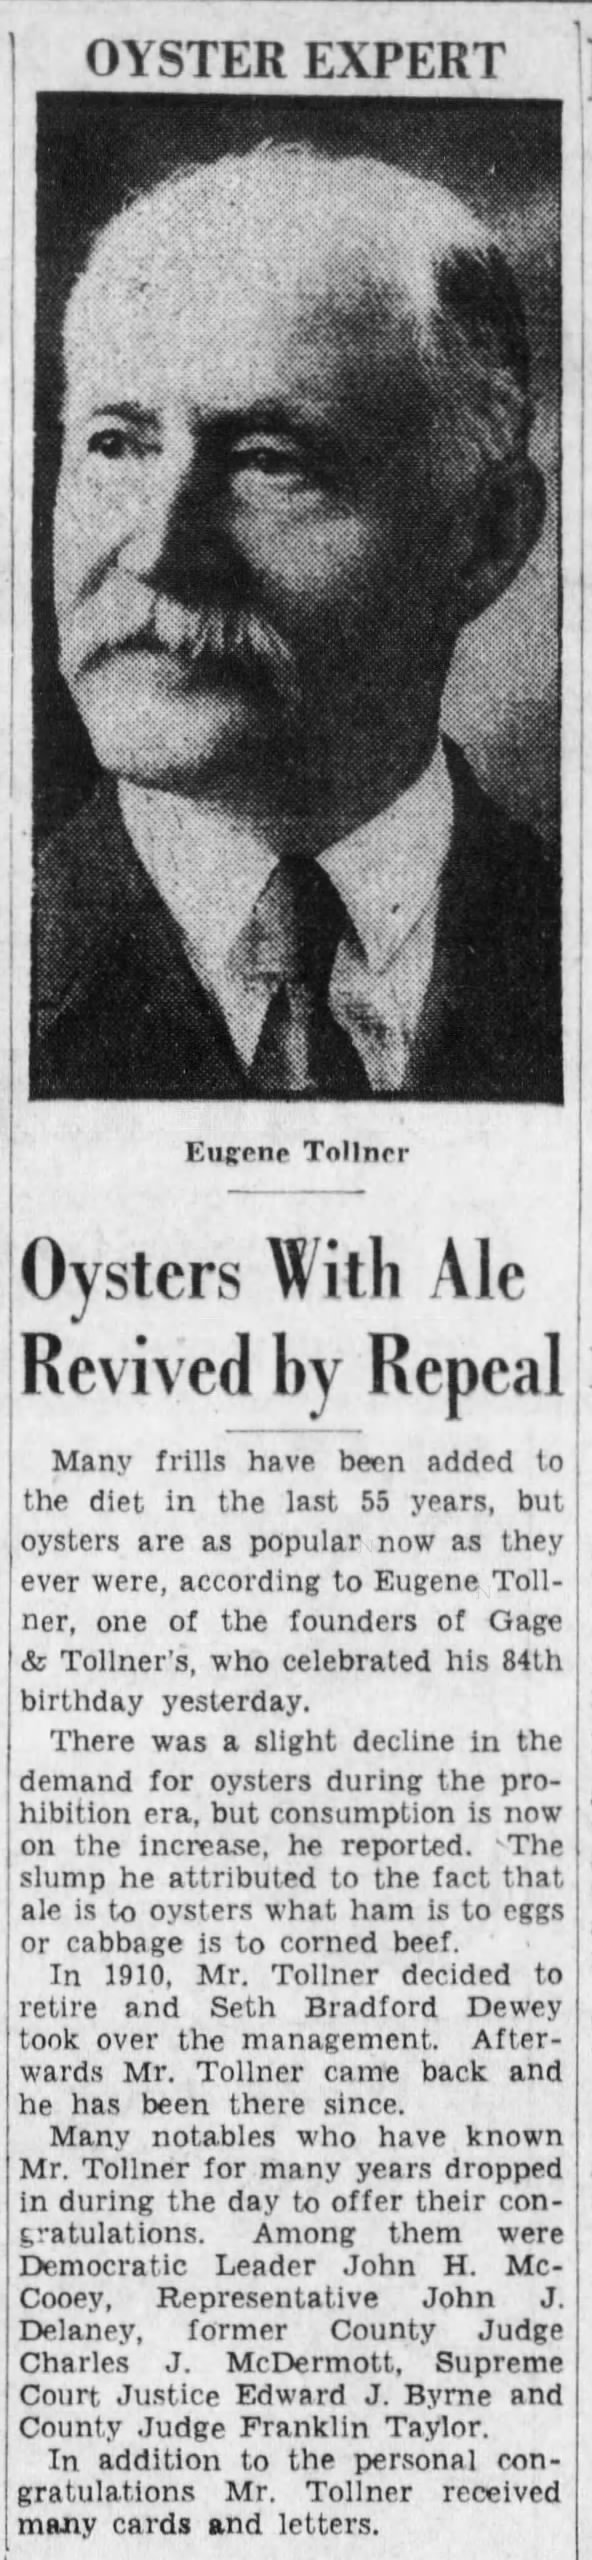 Oysters back in vogue thanks to prohibition repeal, say Gage & Tollner's  founder.